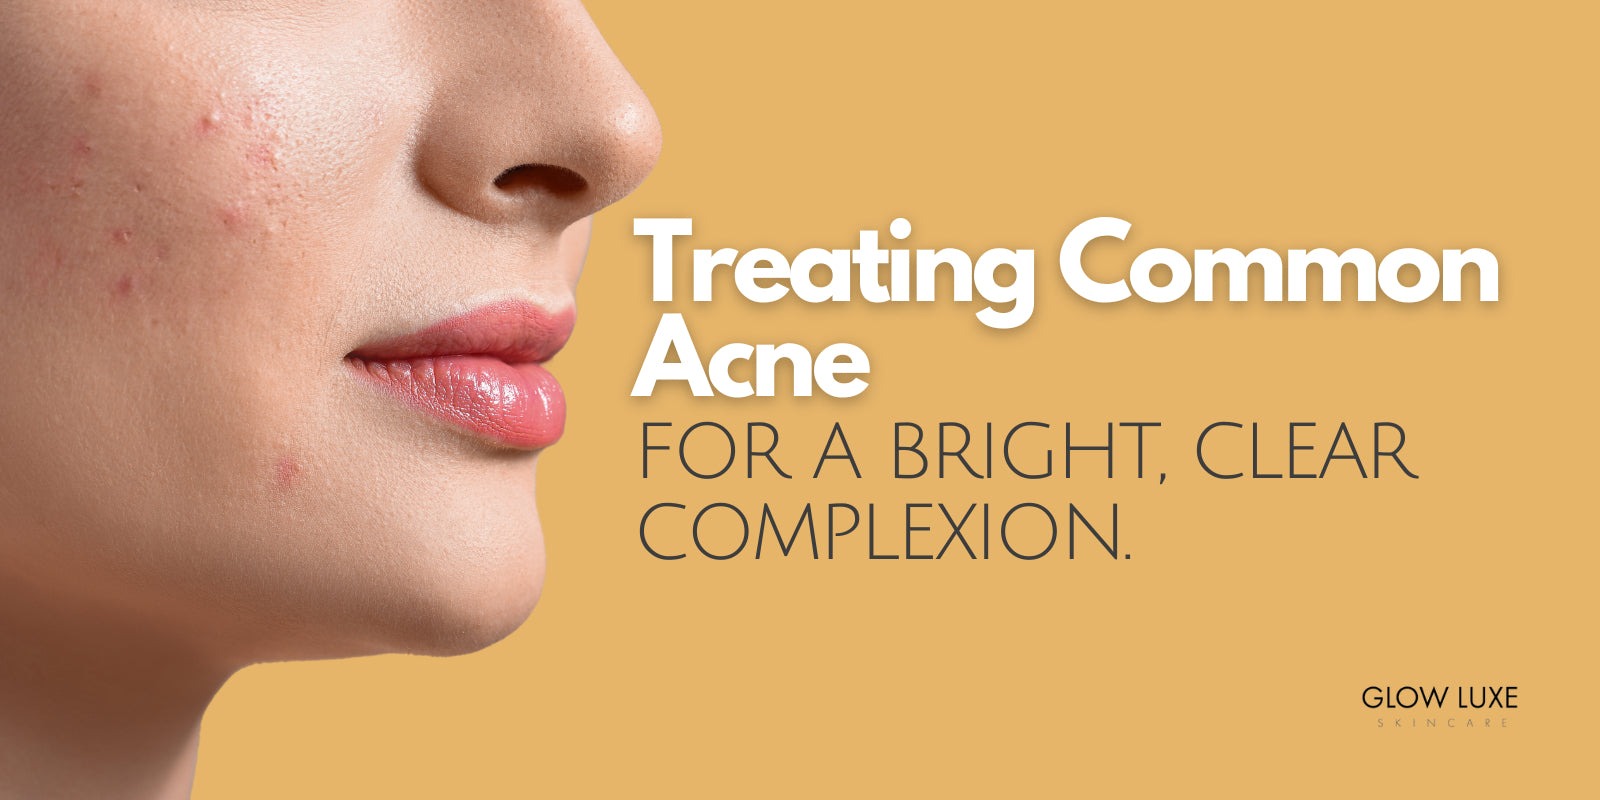 How to treat acne in Victoria BC. Acne treatment near me. Effective acne treatment.